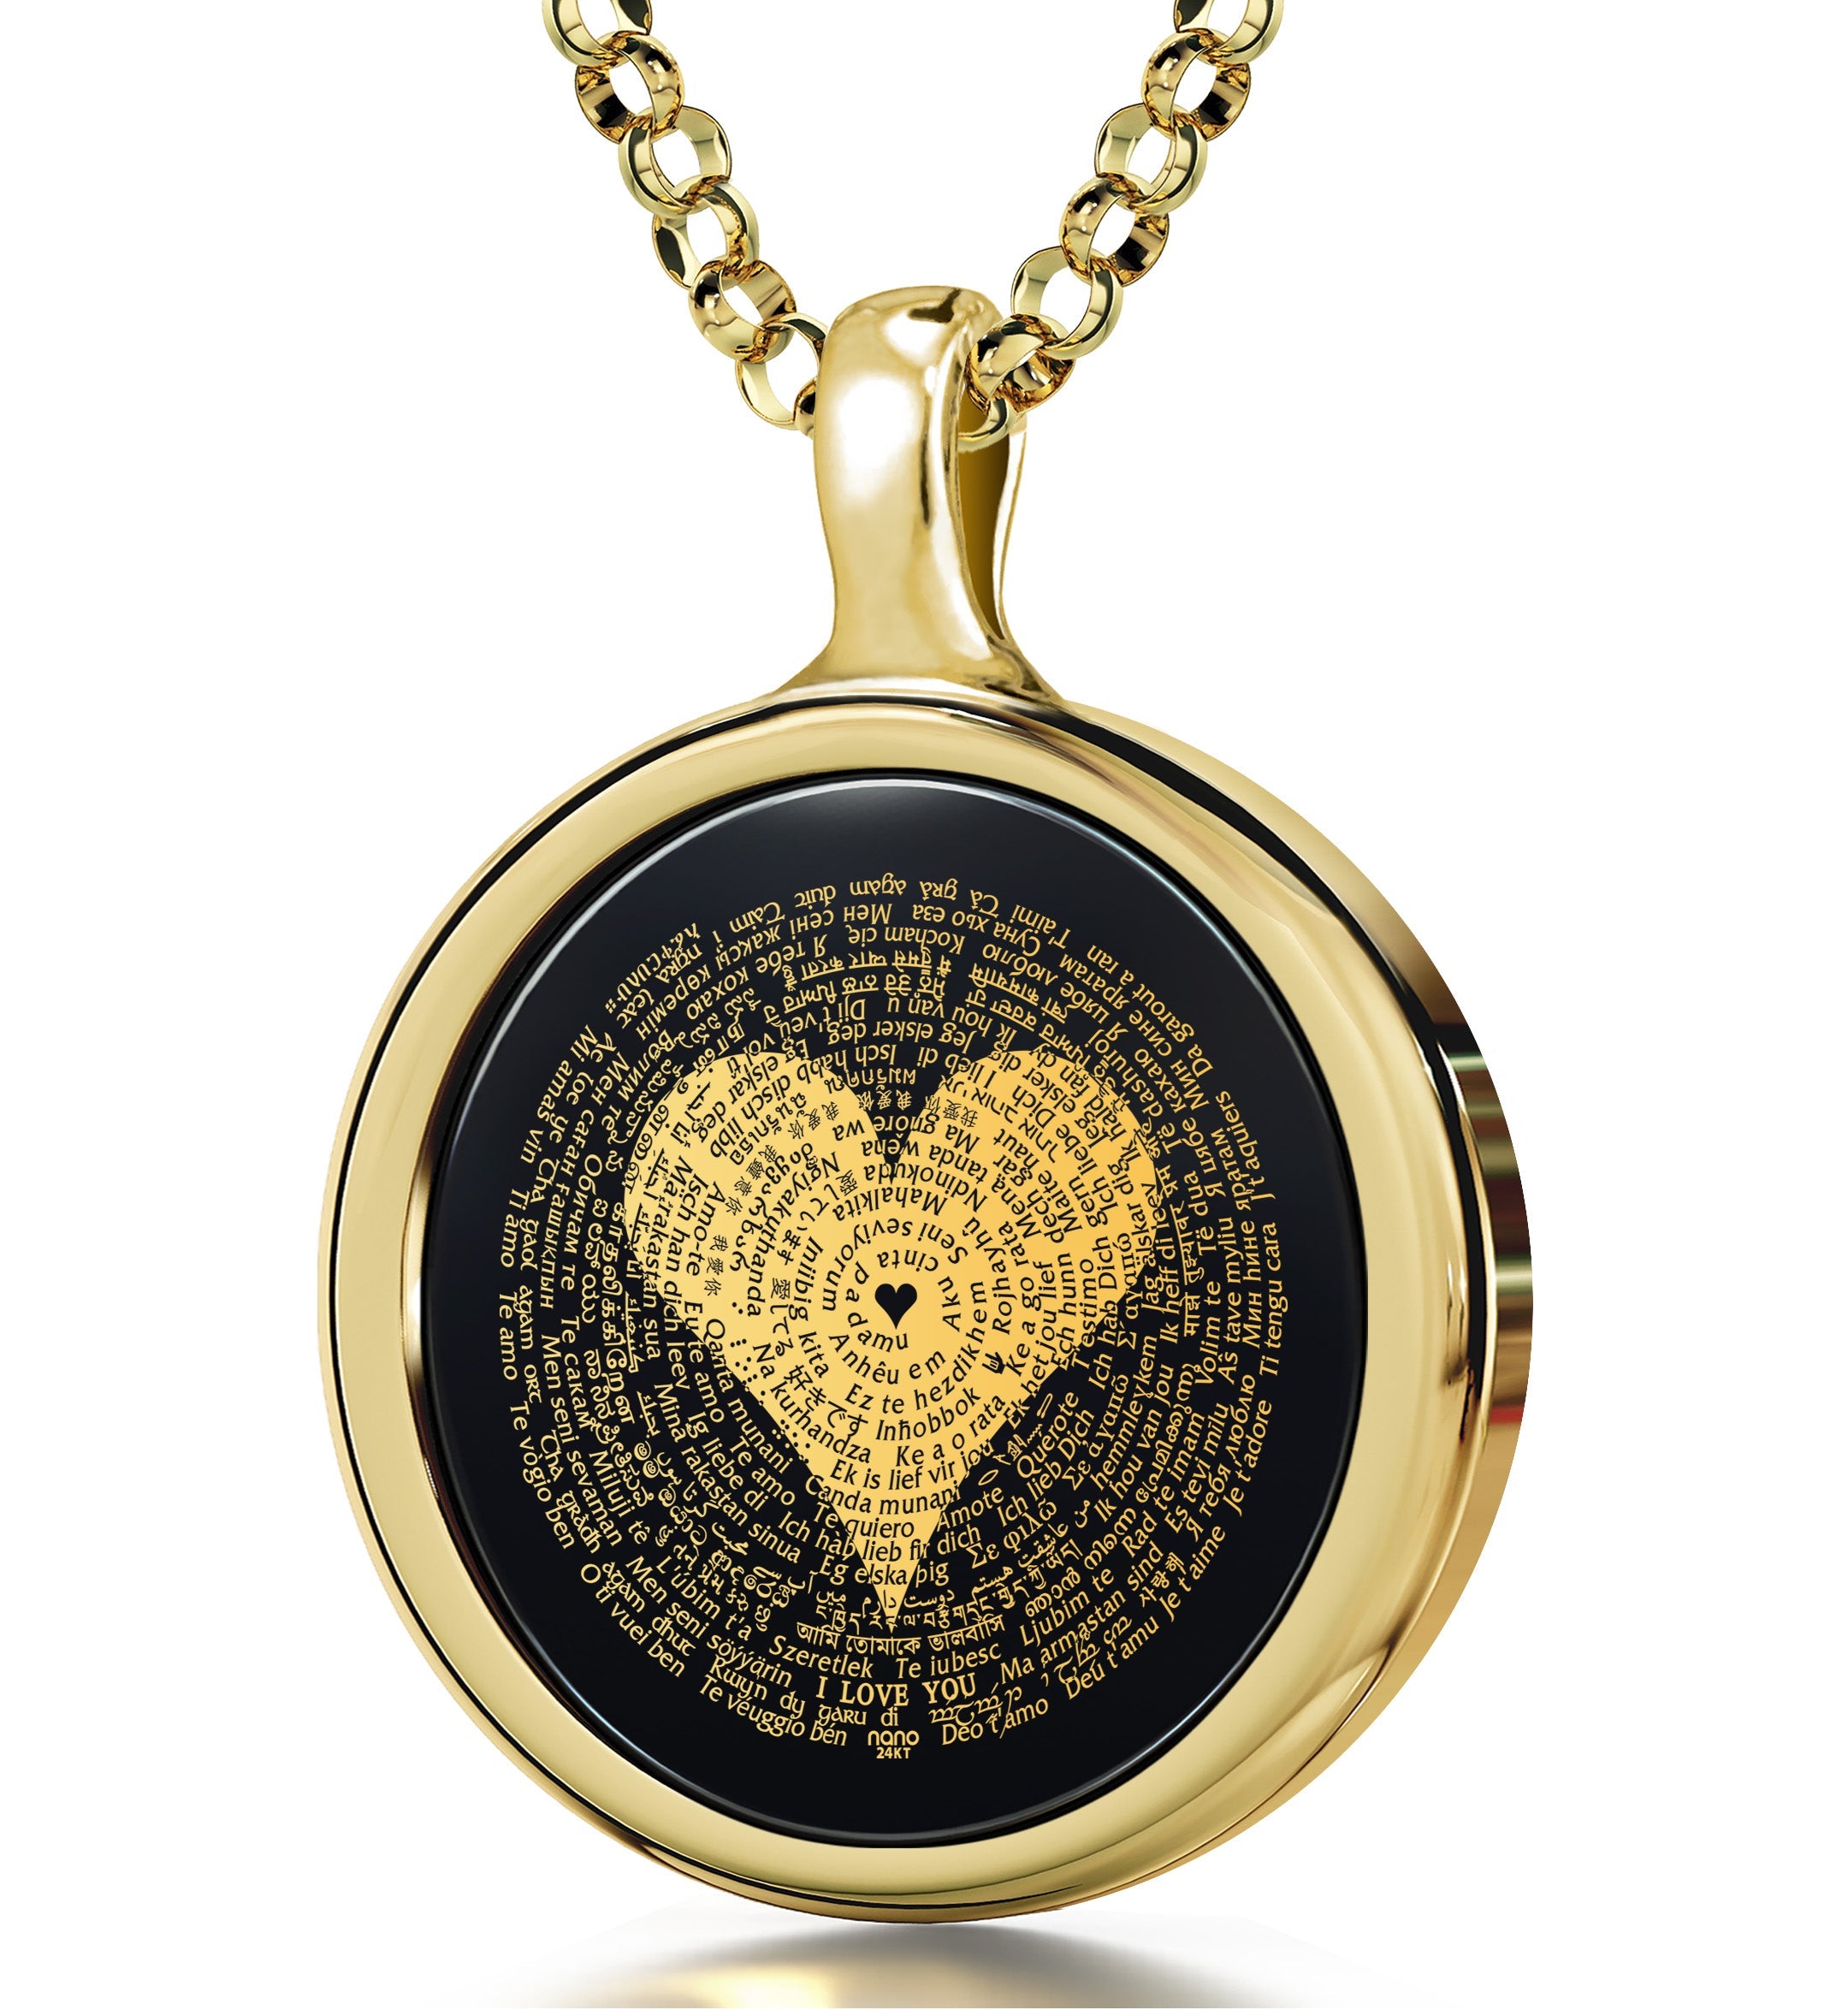 A decorative I Love You Necklace in 120 Languages featuring a spiral of "i love you" in various languages, centered around a black heart.